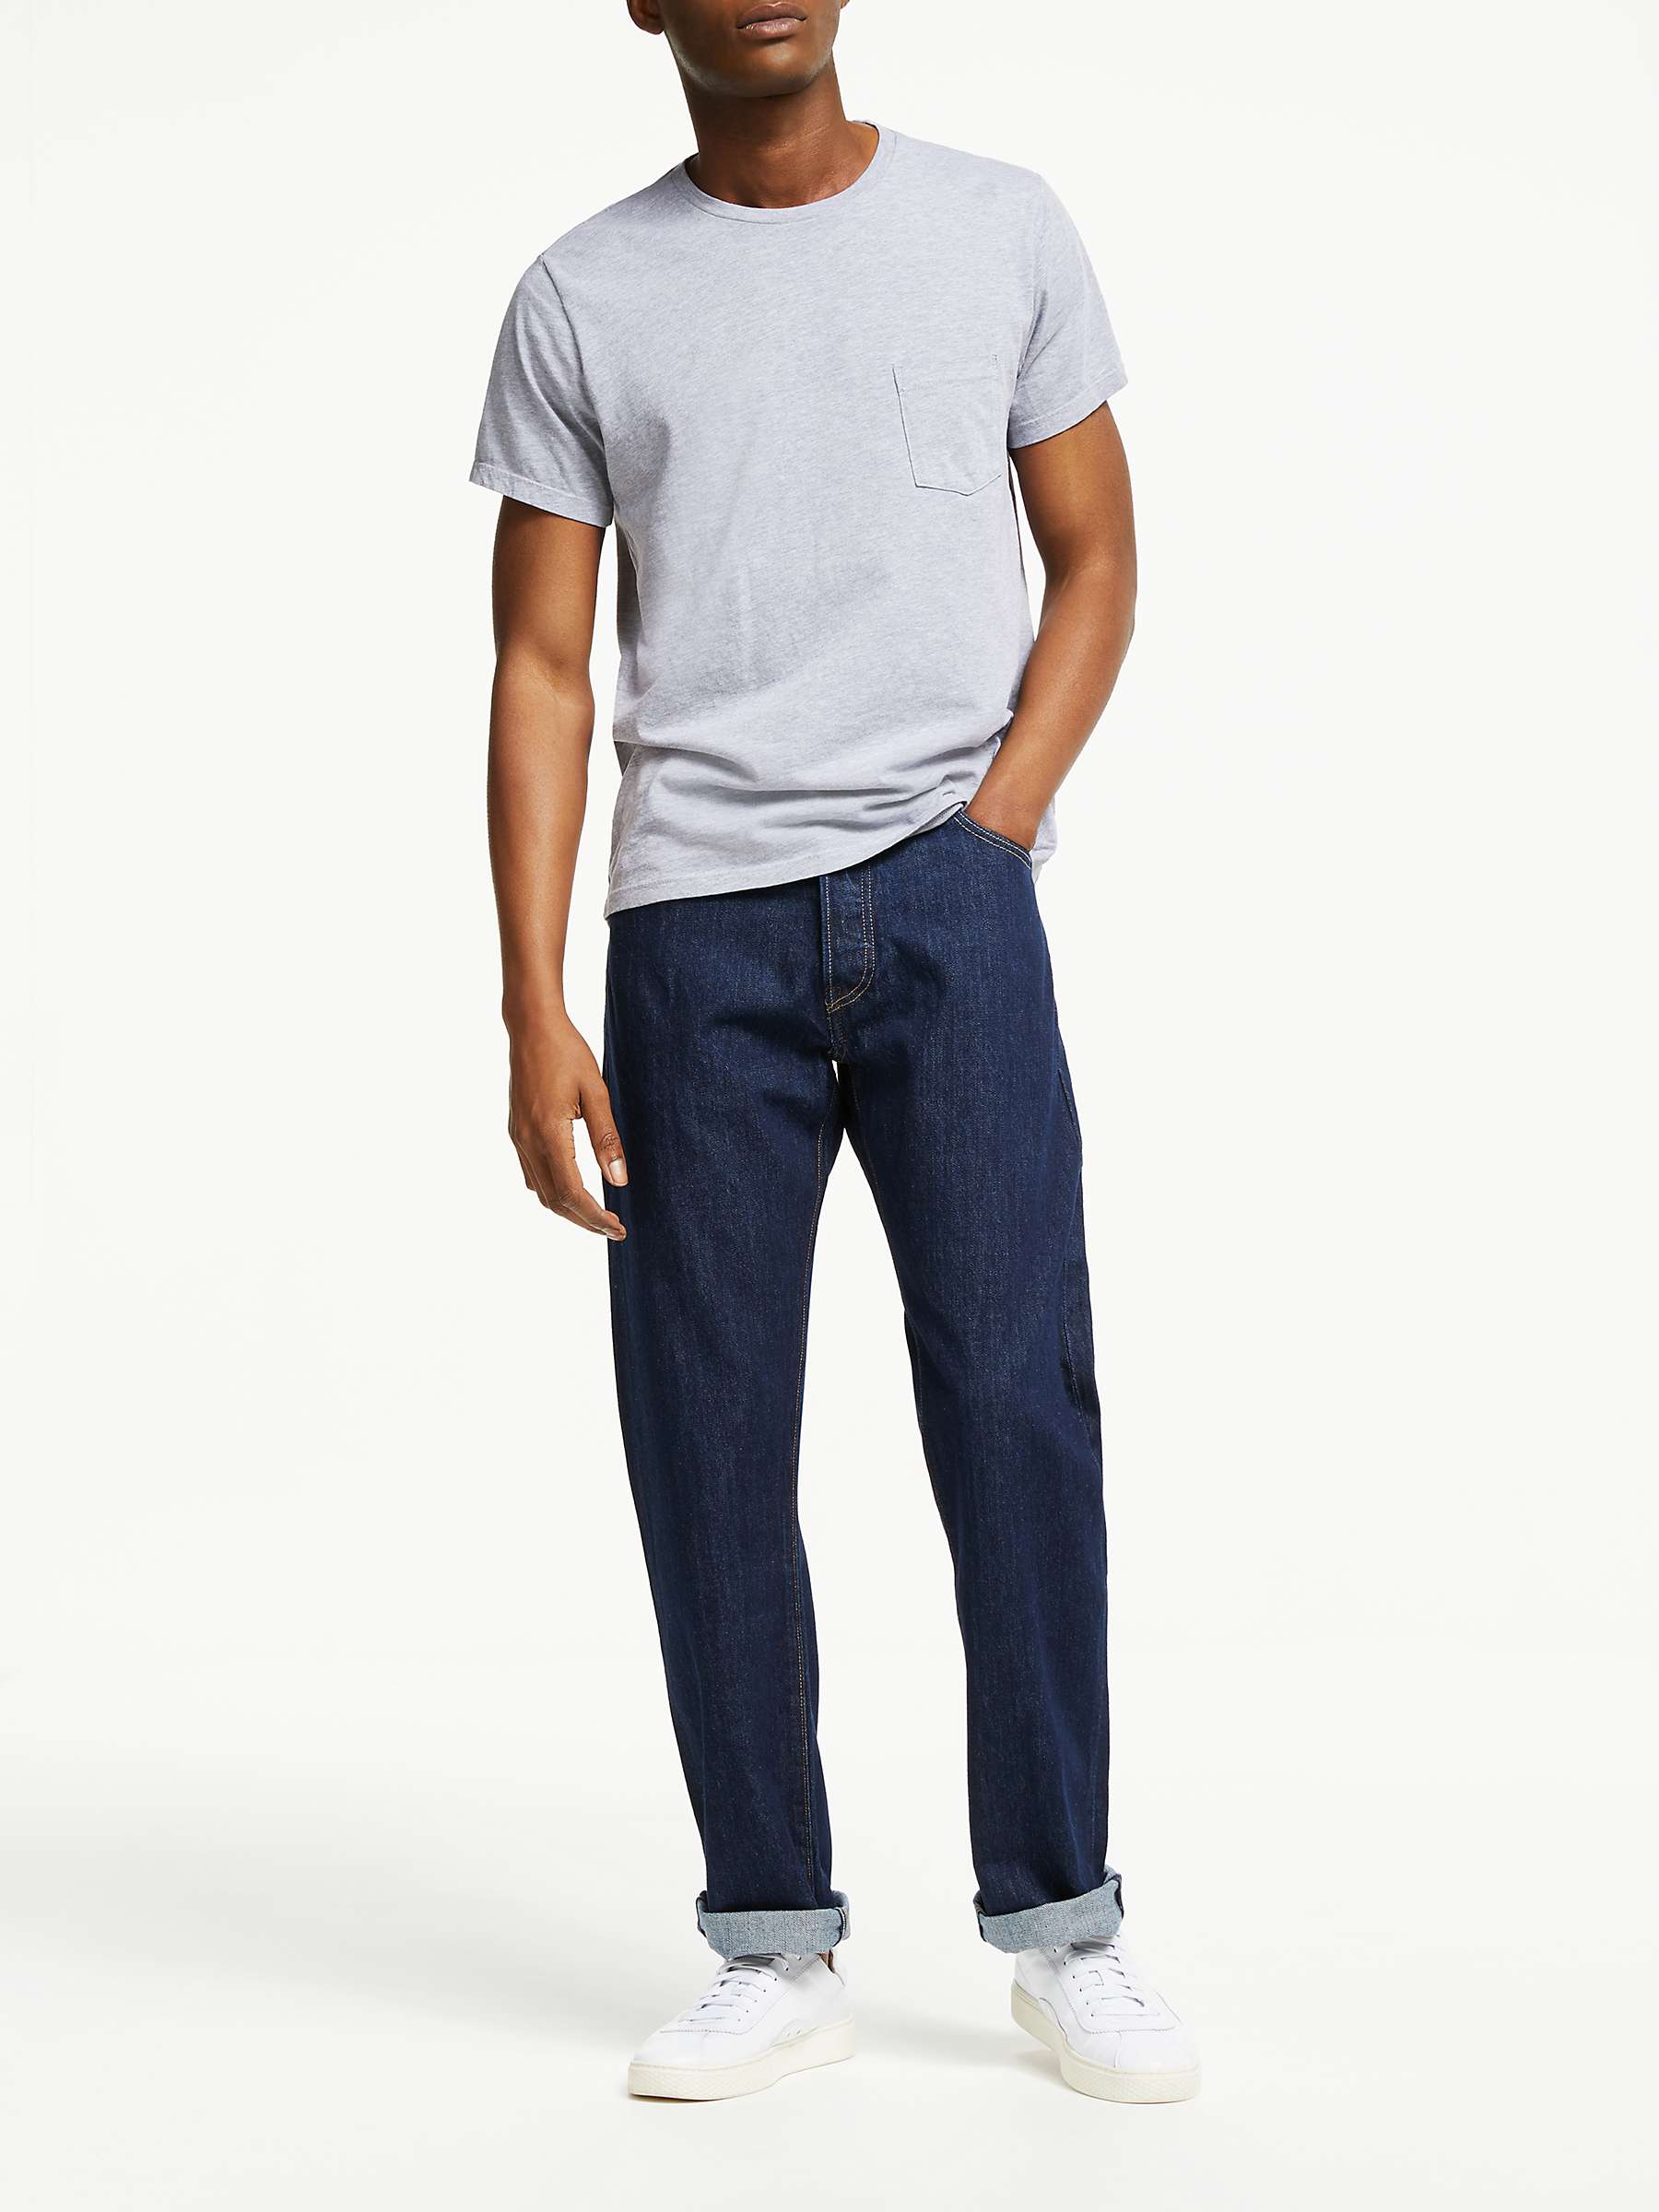 Buy Levi's 501 Original Straight Jeans, One Wash Online at johnlewis.com